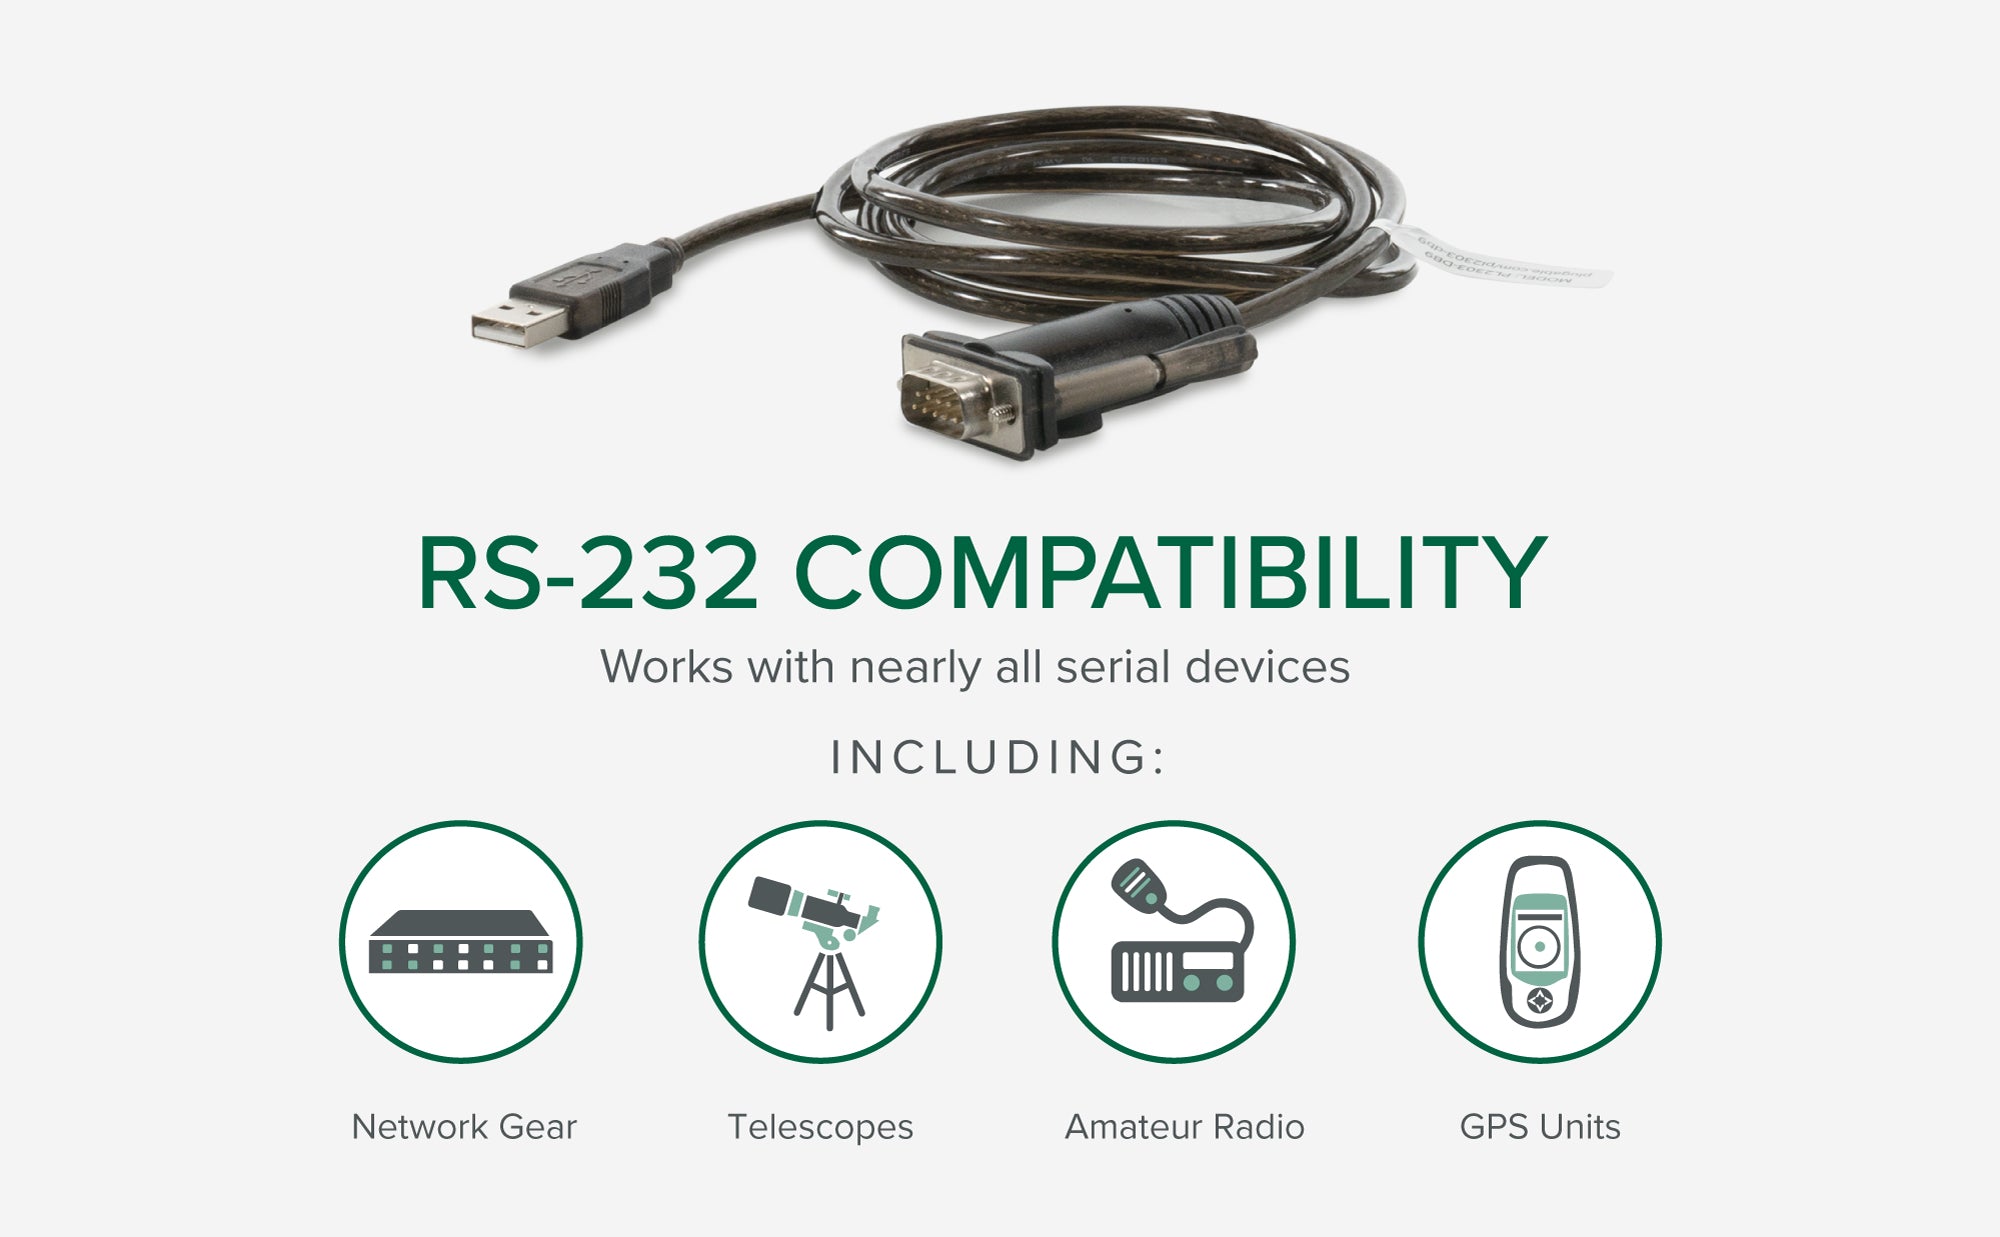 RS-232 compatible devices include Network Gear, Telescopes, Amature Radio, GPS units